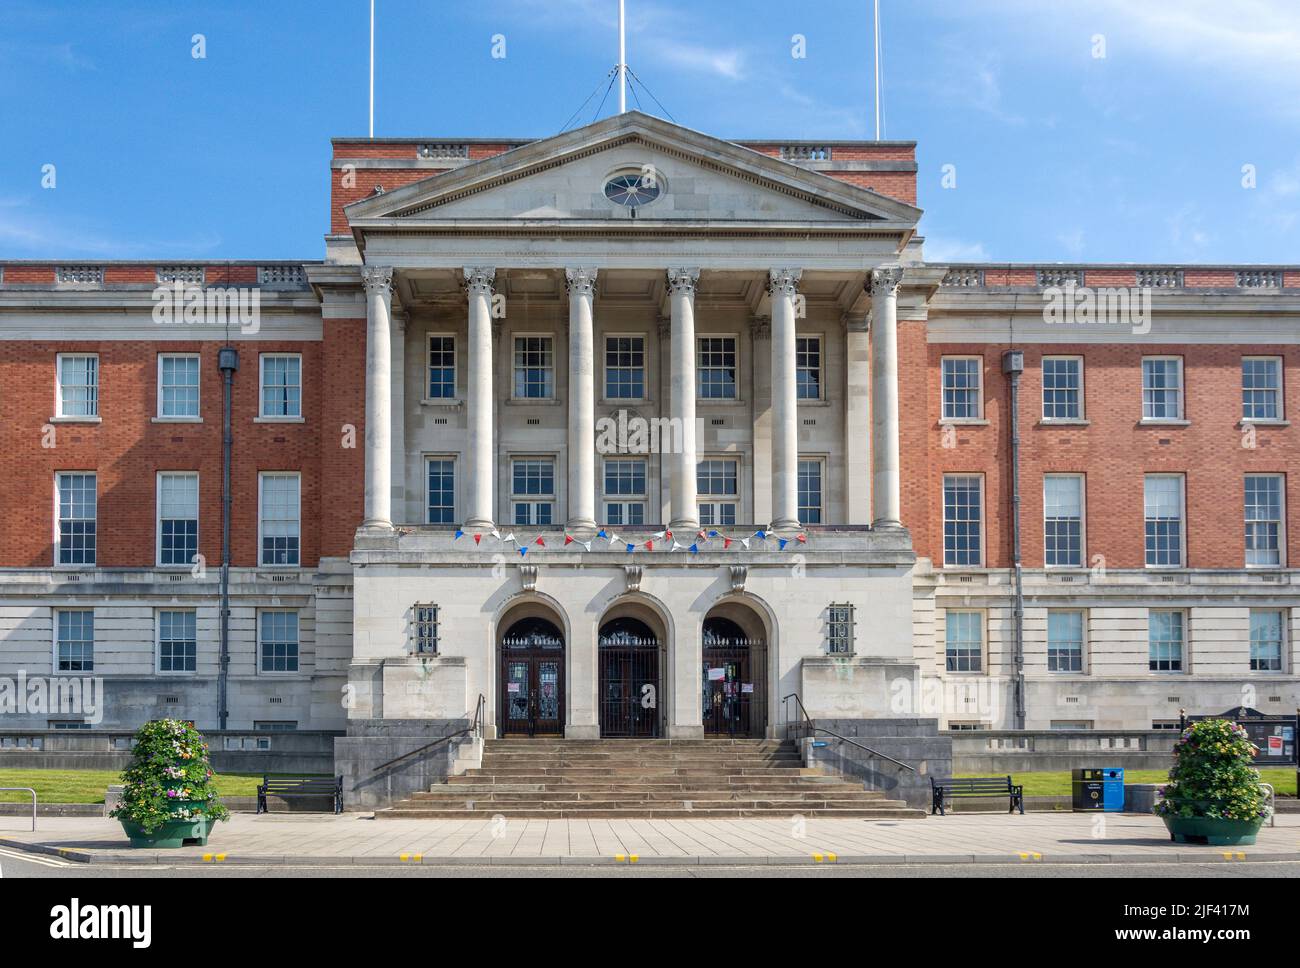 Chesterfield Borough Council Building, Rose Hill, Chesterfield, Derbyshire, England, United Kingdom Stock Photo